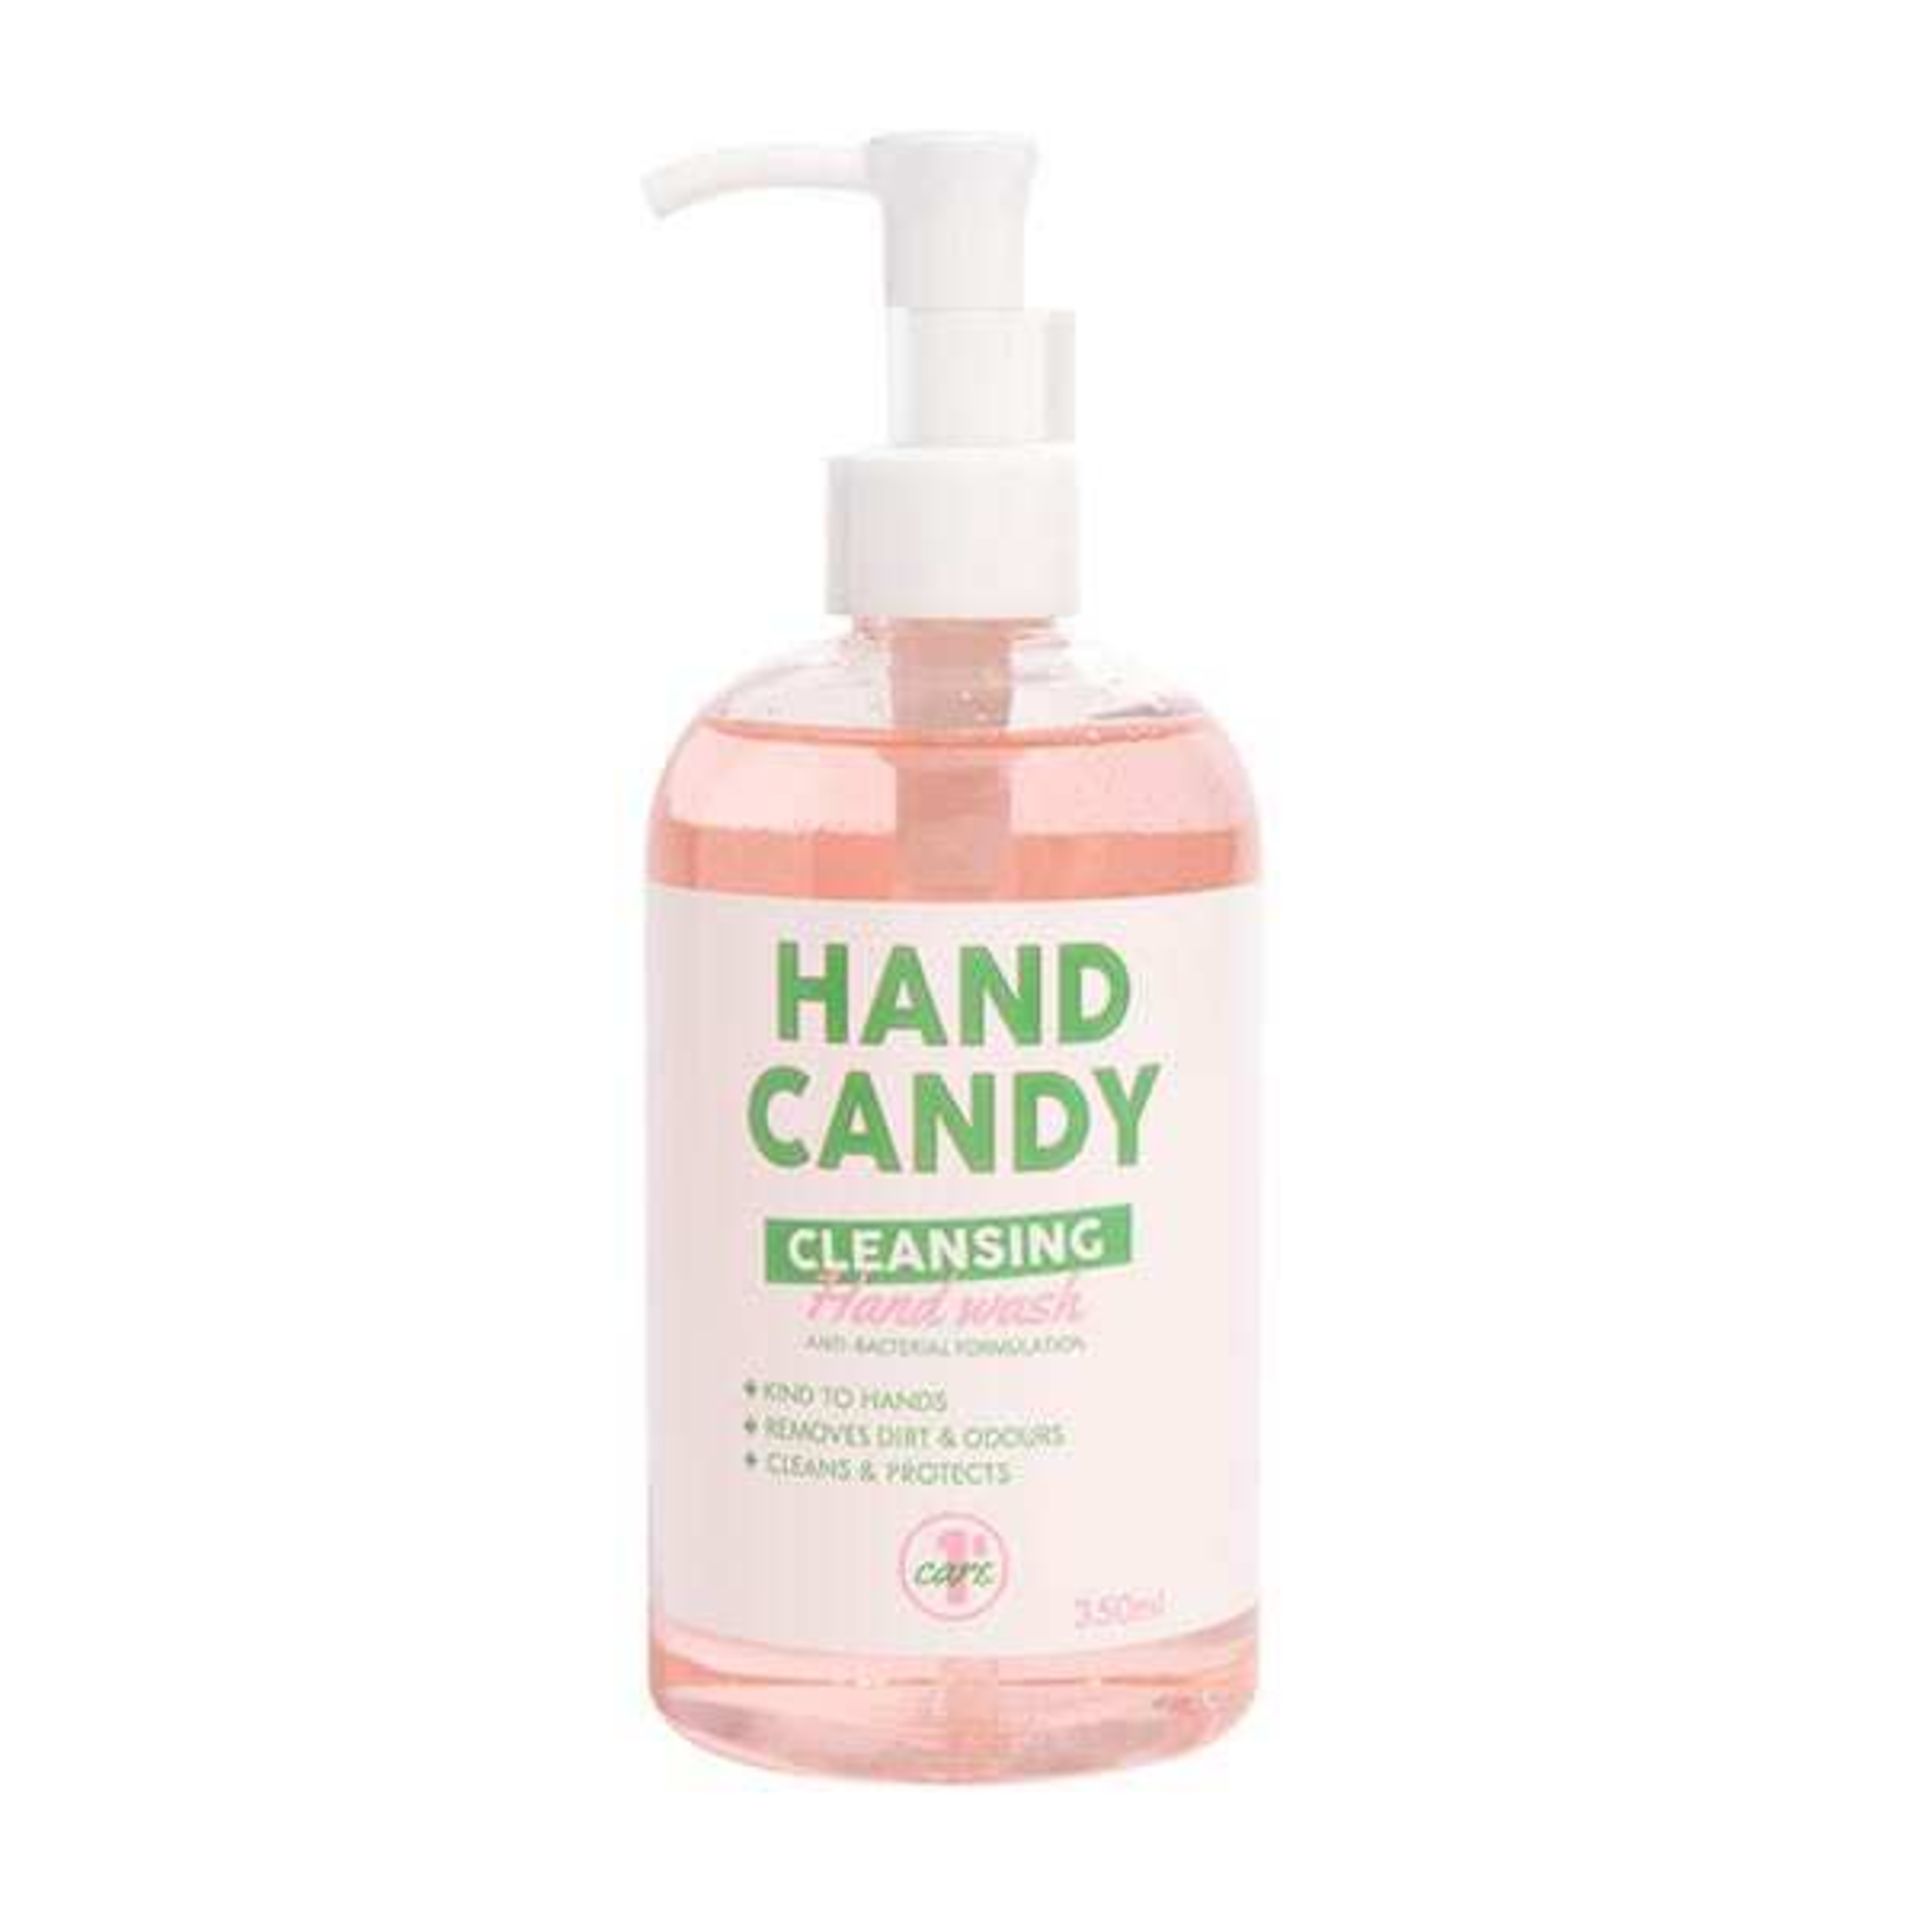 Pallet of Hand Candy Cleansing Hand Wash - Image 2 of 2